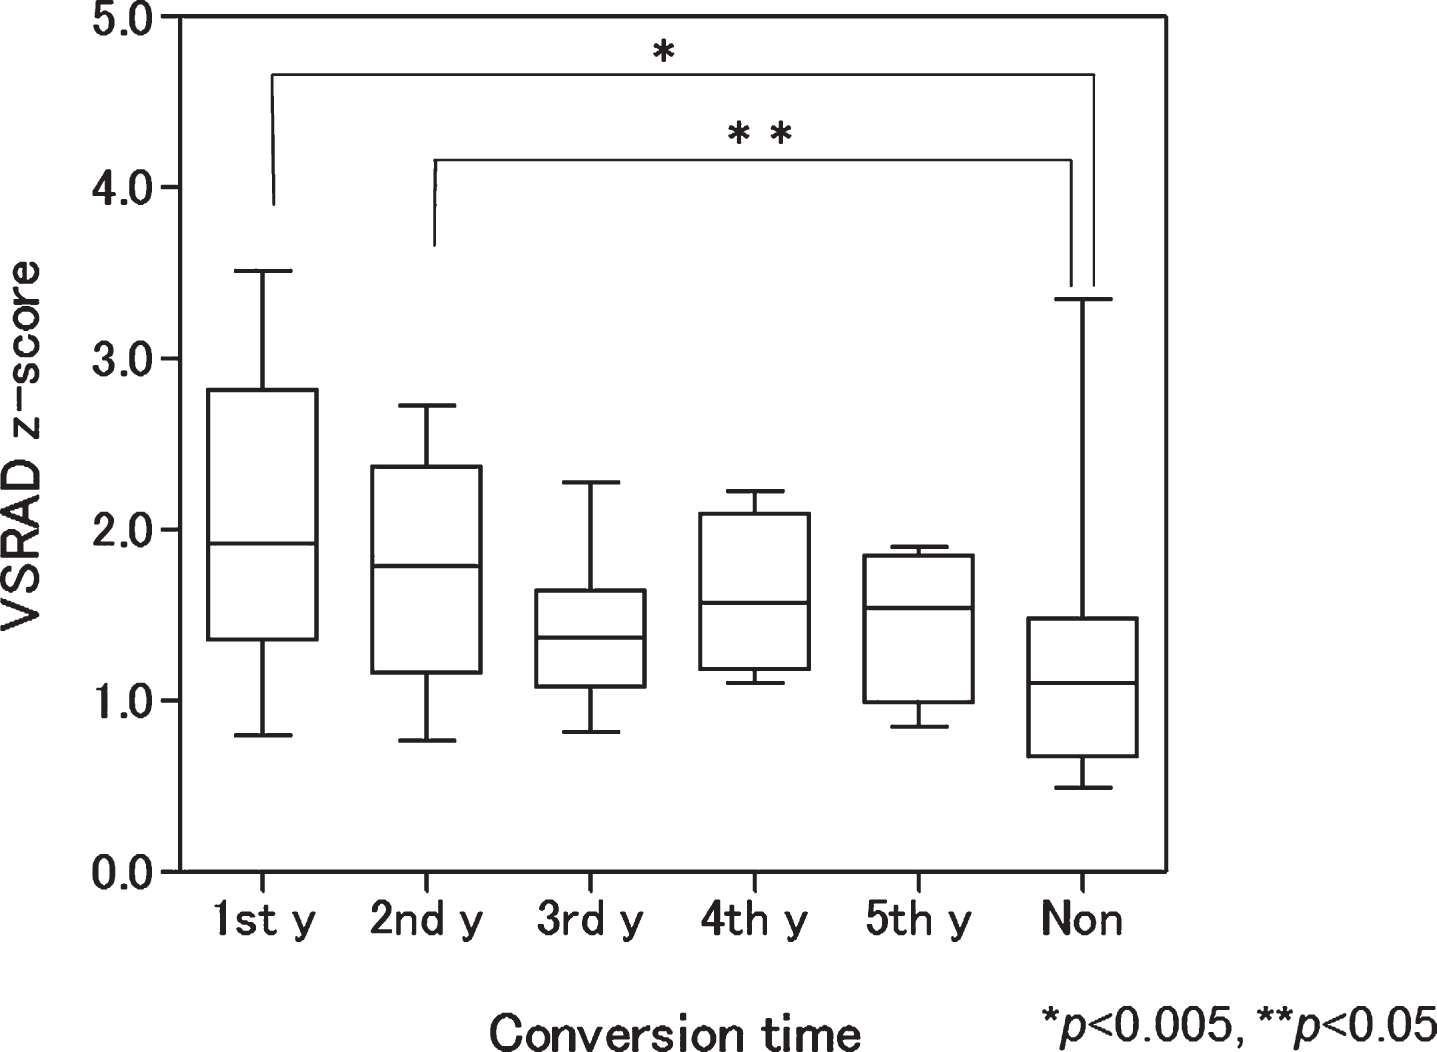 Box plot of baseline voxel-based specific regional analysis system for Alzheimer’s disease (VSRAD) z-scores according to conversion time. Patients with mild cognitive impairment progressing to Alzheimer’s disease in the first and second years had significantly higher scores than nonconverters (p < 0.005 and <0.05, respectively). 1st y, first year converter; 2nd y, second year converter; 3rd y, third year converter; 4th y, fourth year converter; 5th y, fifth year converter; Non, nonconverter.